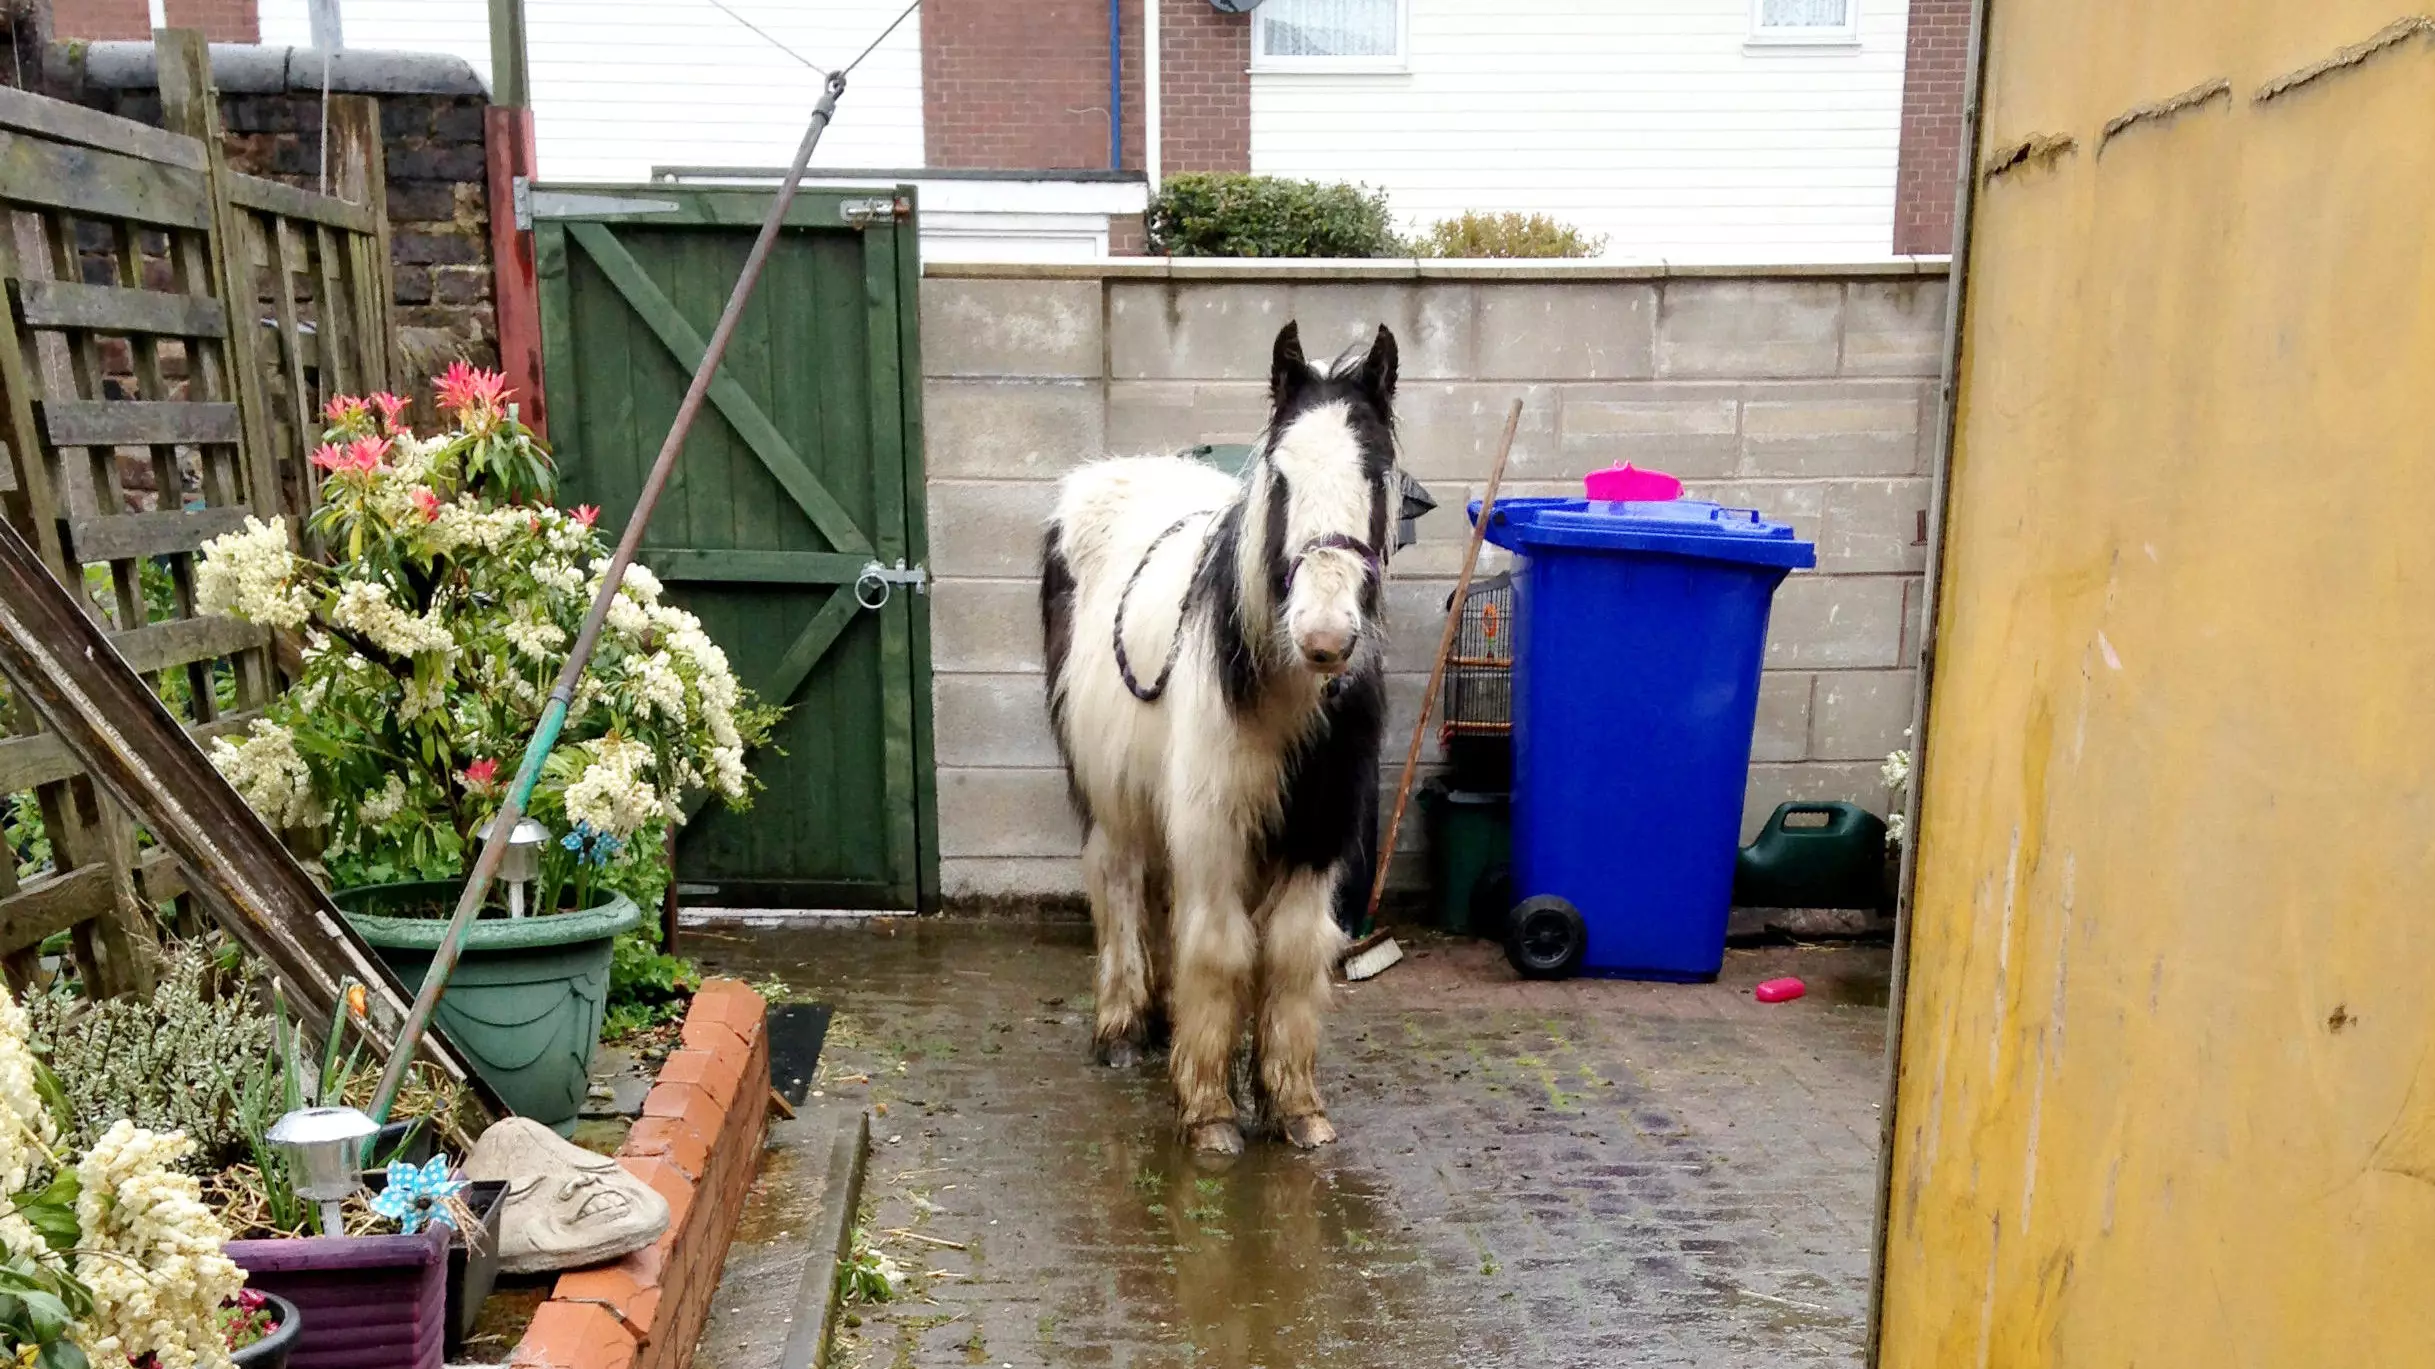 Shocked Grandmother Finds A Pony Dumped In Her Back Yard 